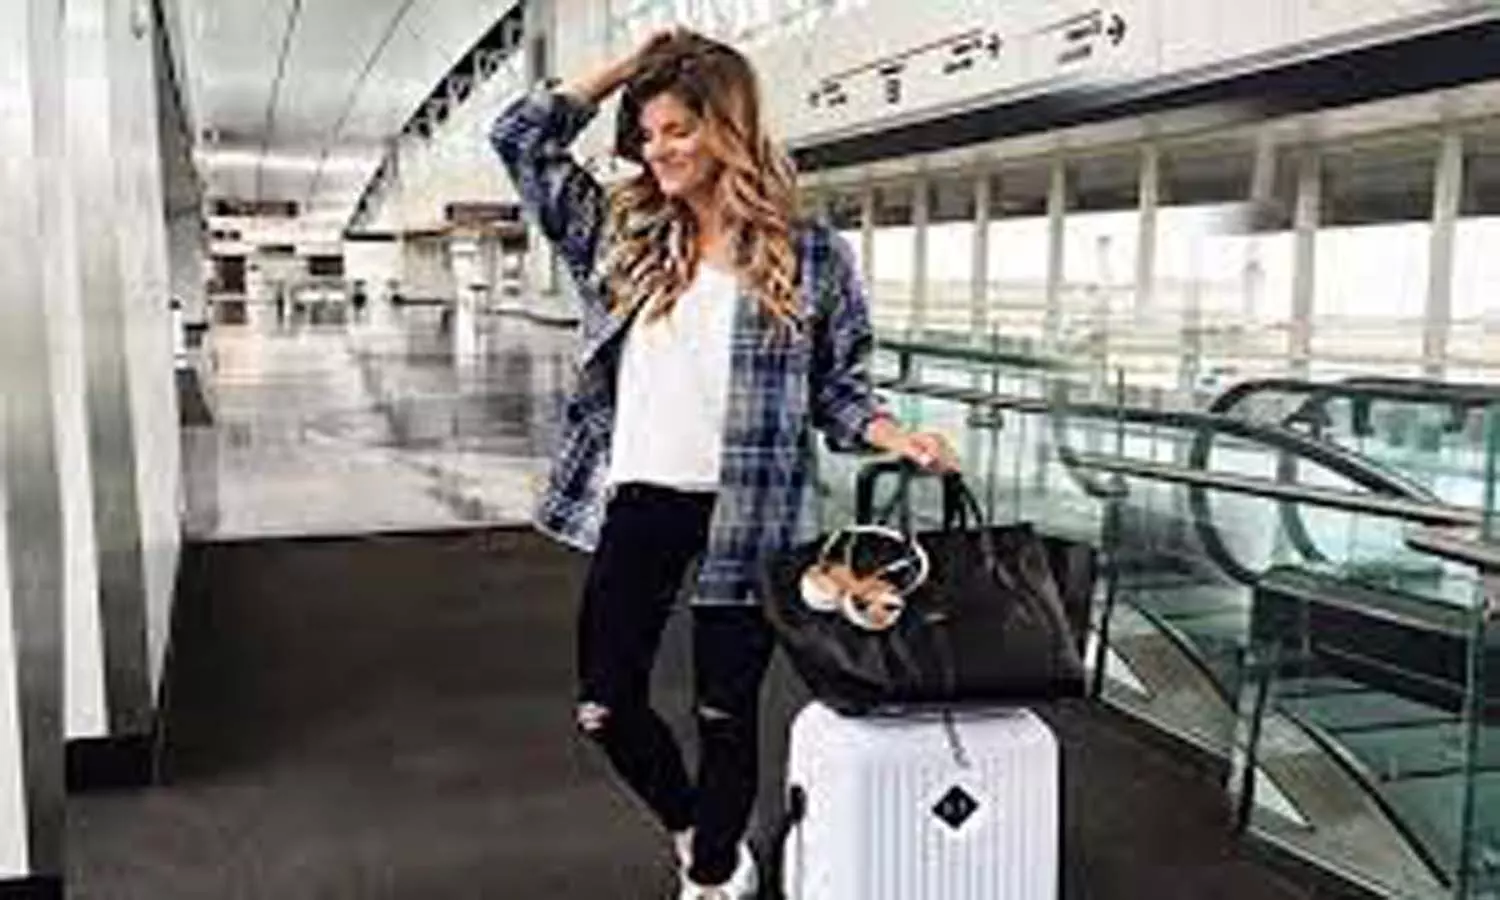 Comfy Style: Travel Outfits to Increase Your Sanity This Holiday